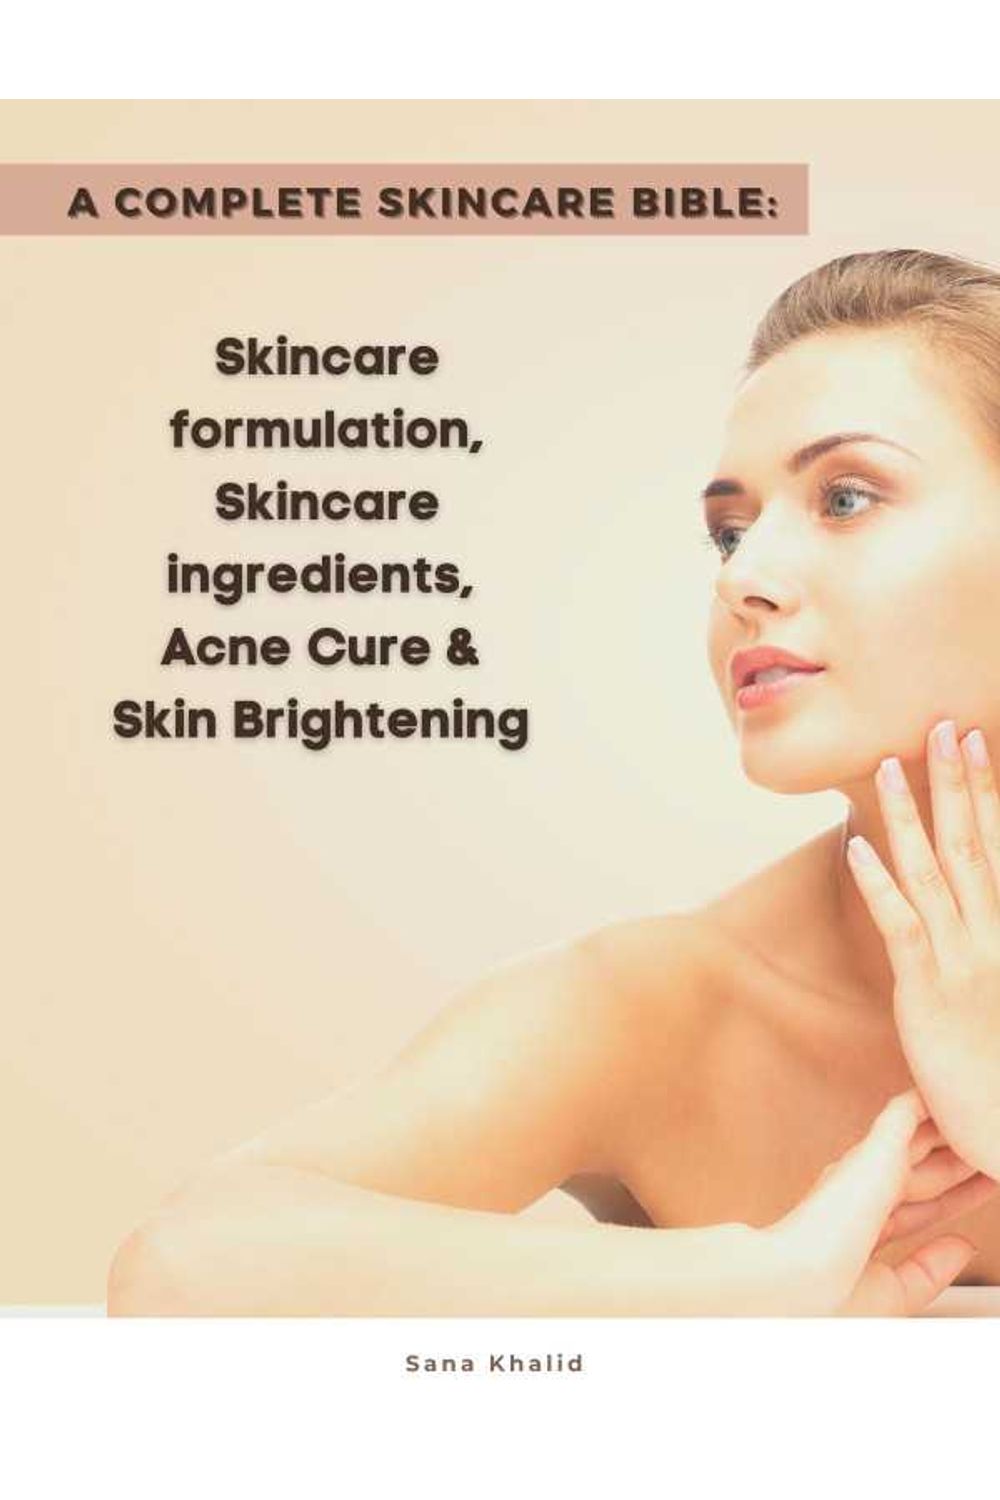 bw-a-complete-skincare-bible-skincare-formulation-skincare-ingredients-acne-cure-amp-skin-brightening-decipher-science-9783985101399